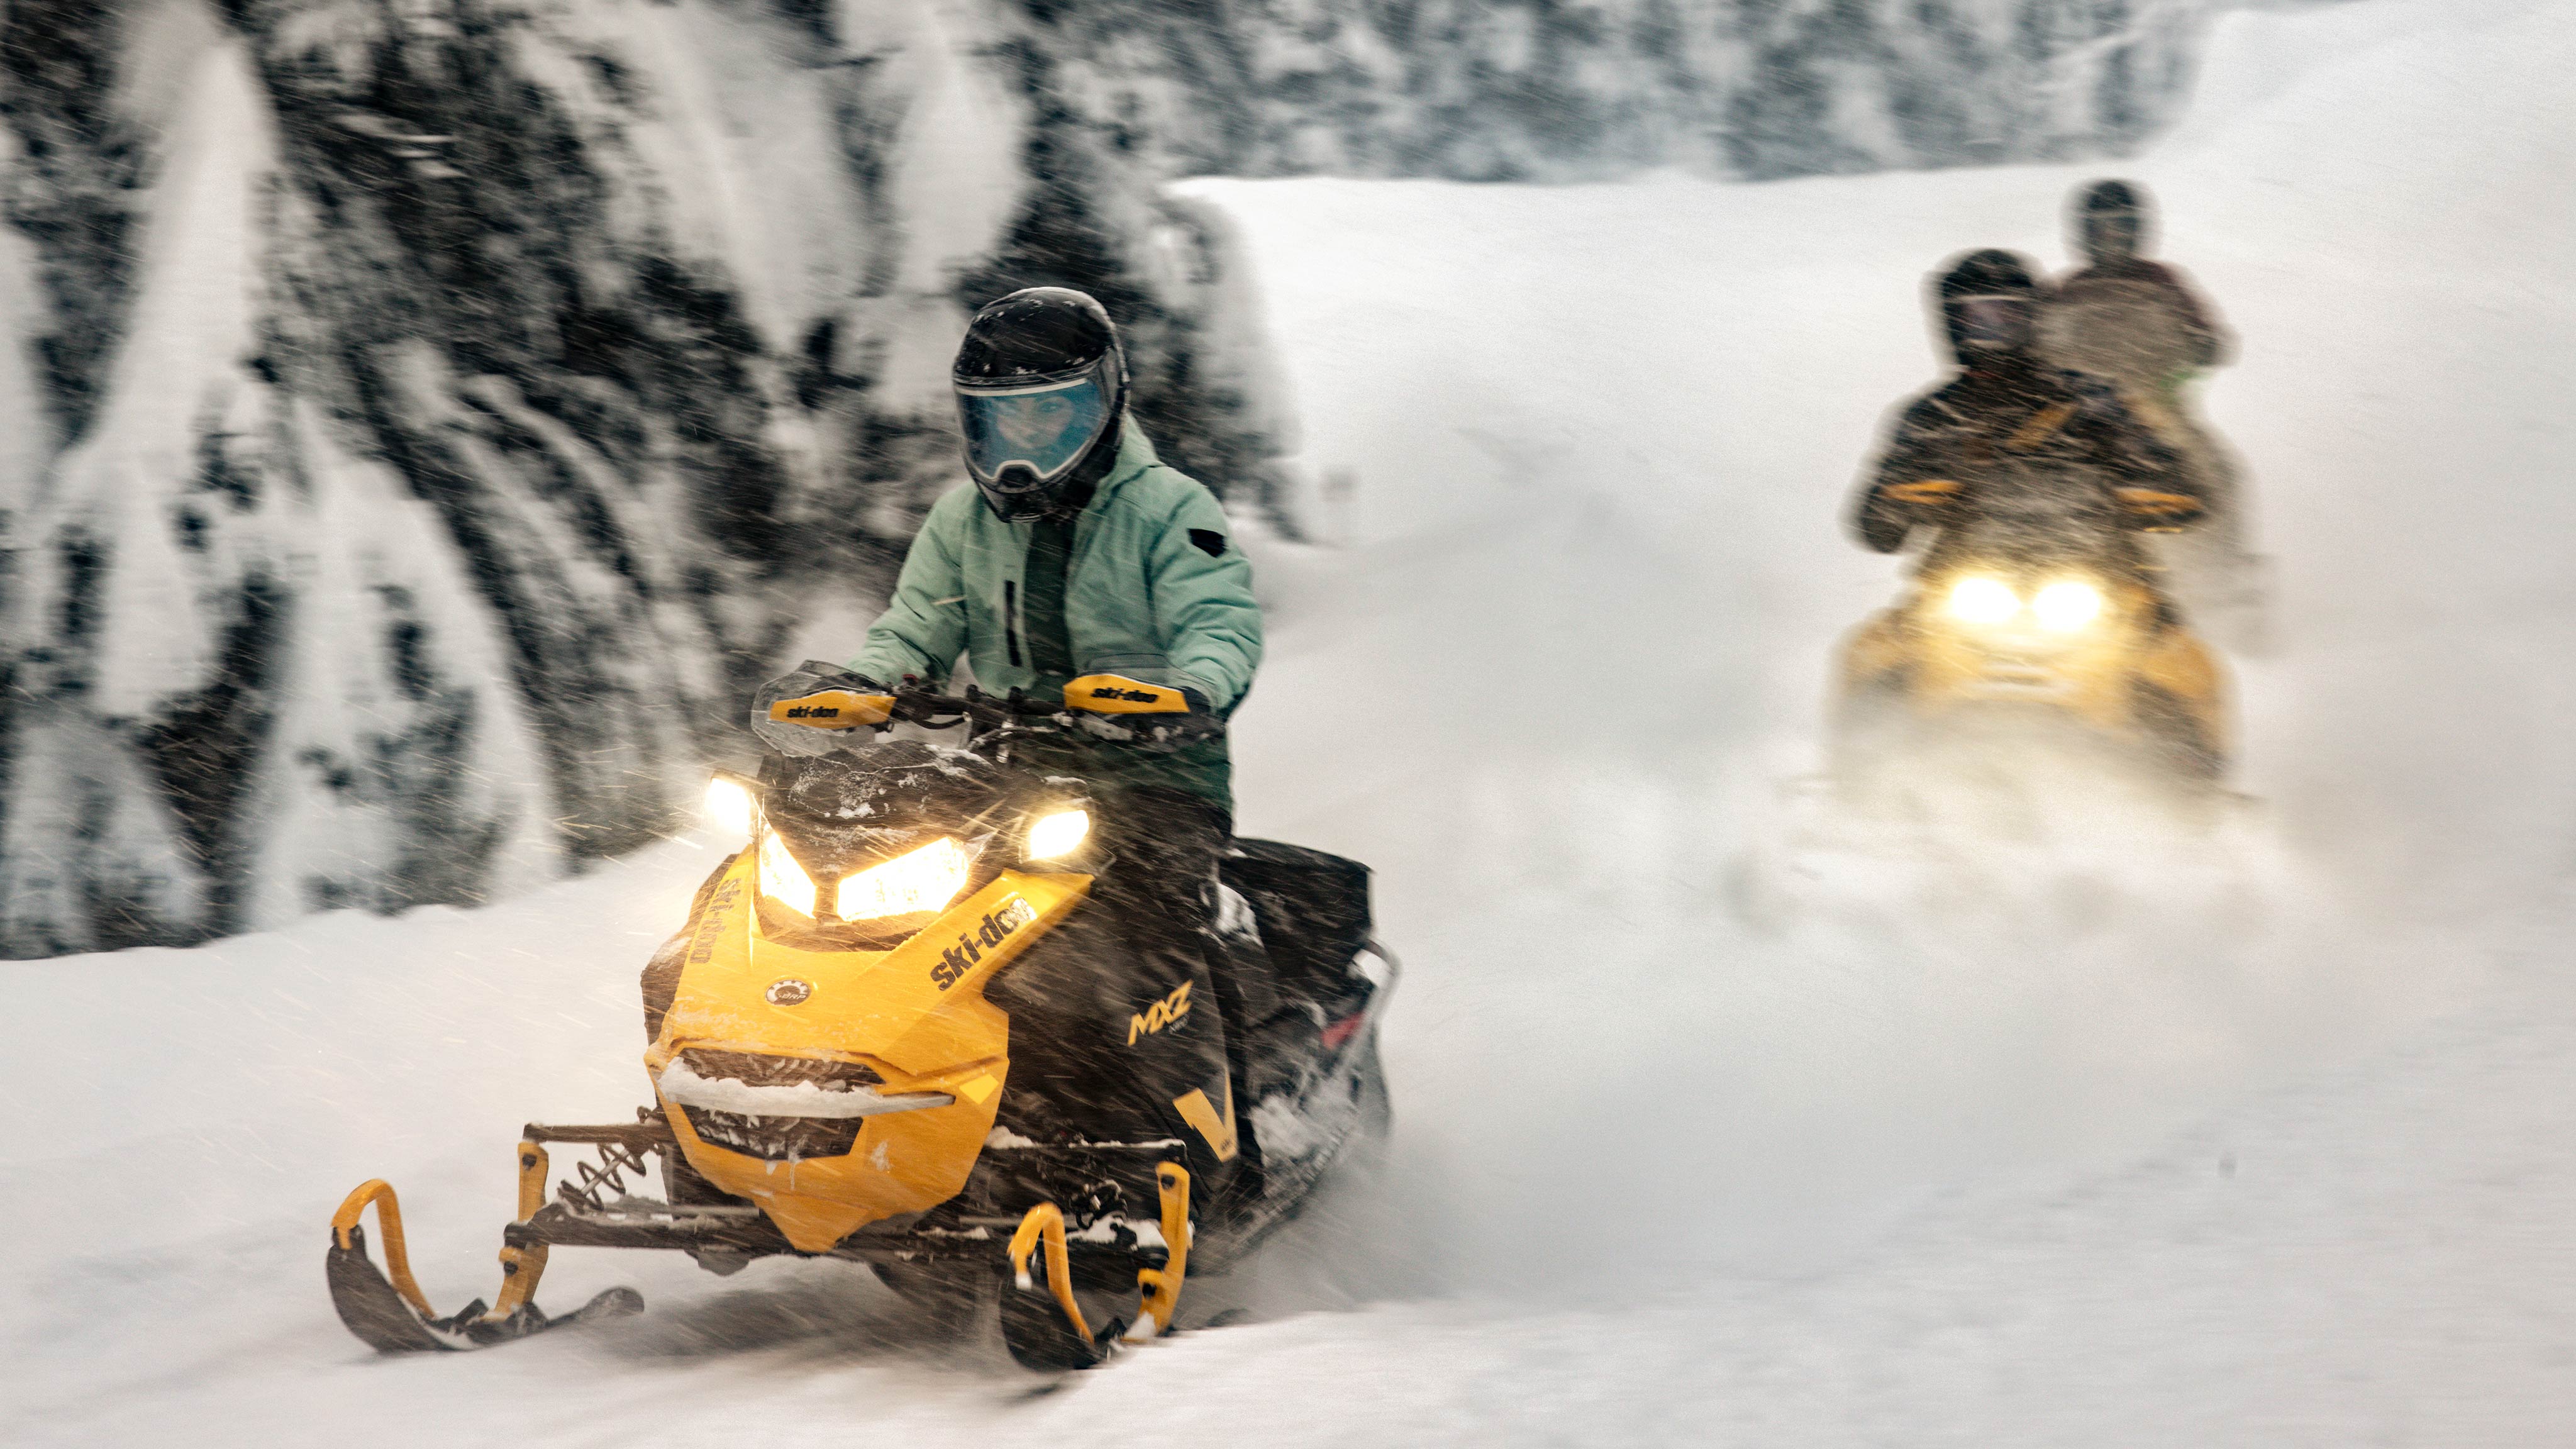 Two 2025 Ski-Doo MXZ NEO trail snowmobile riding in a forest